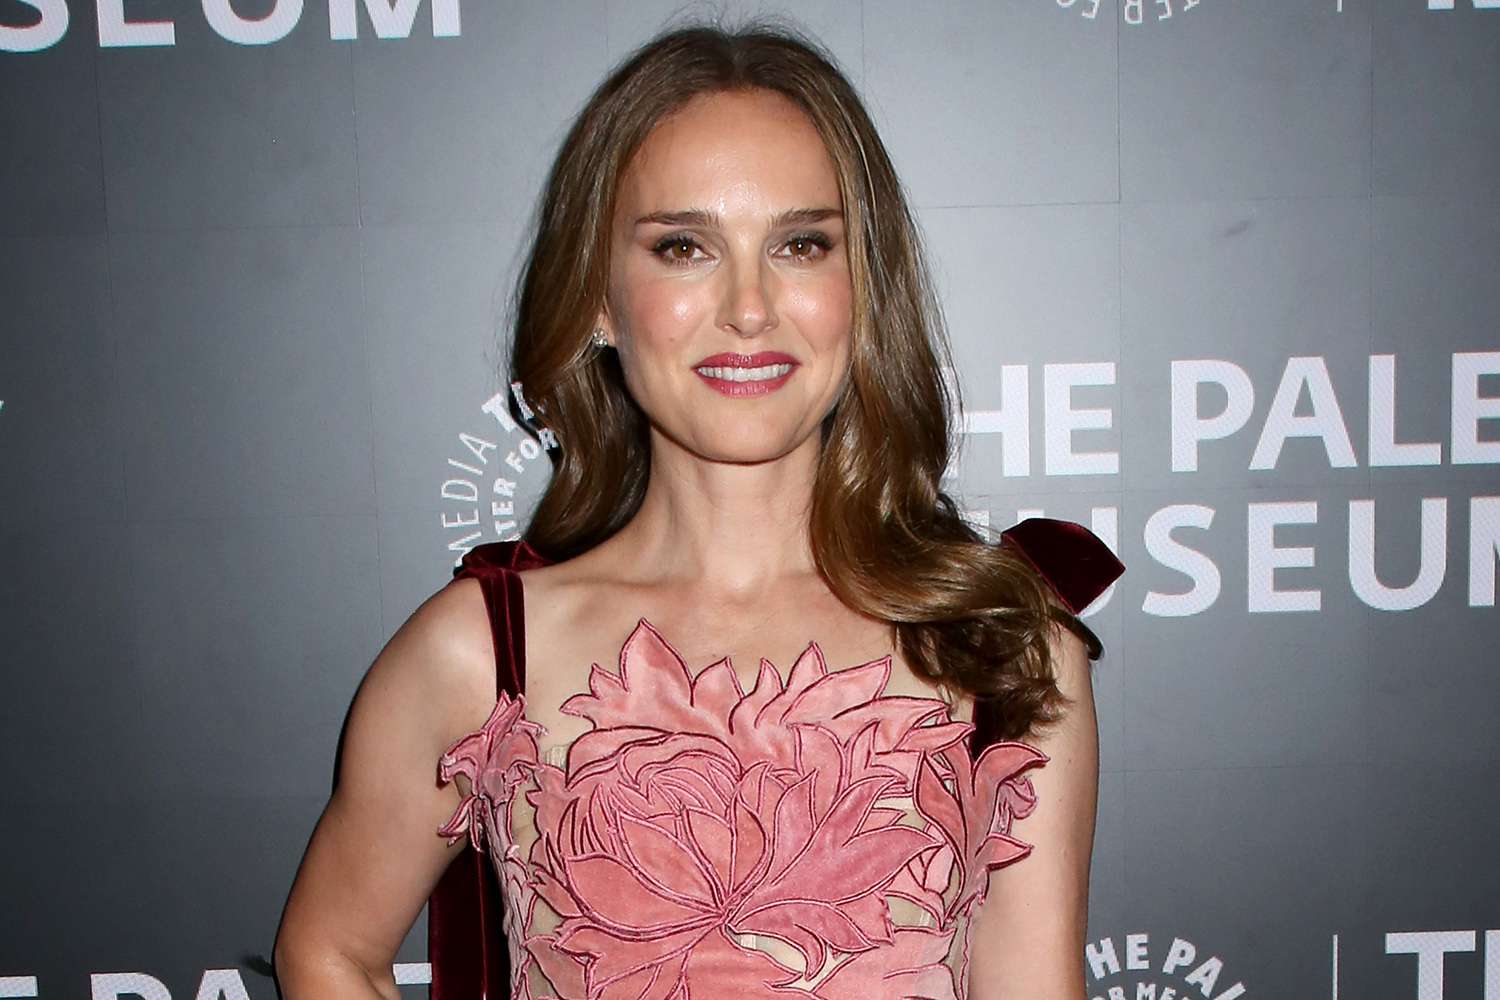 Natalie Portman Shares 'Wild' Discovery She Made Researching Her Family Tree (Exclusive)